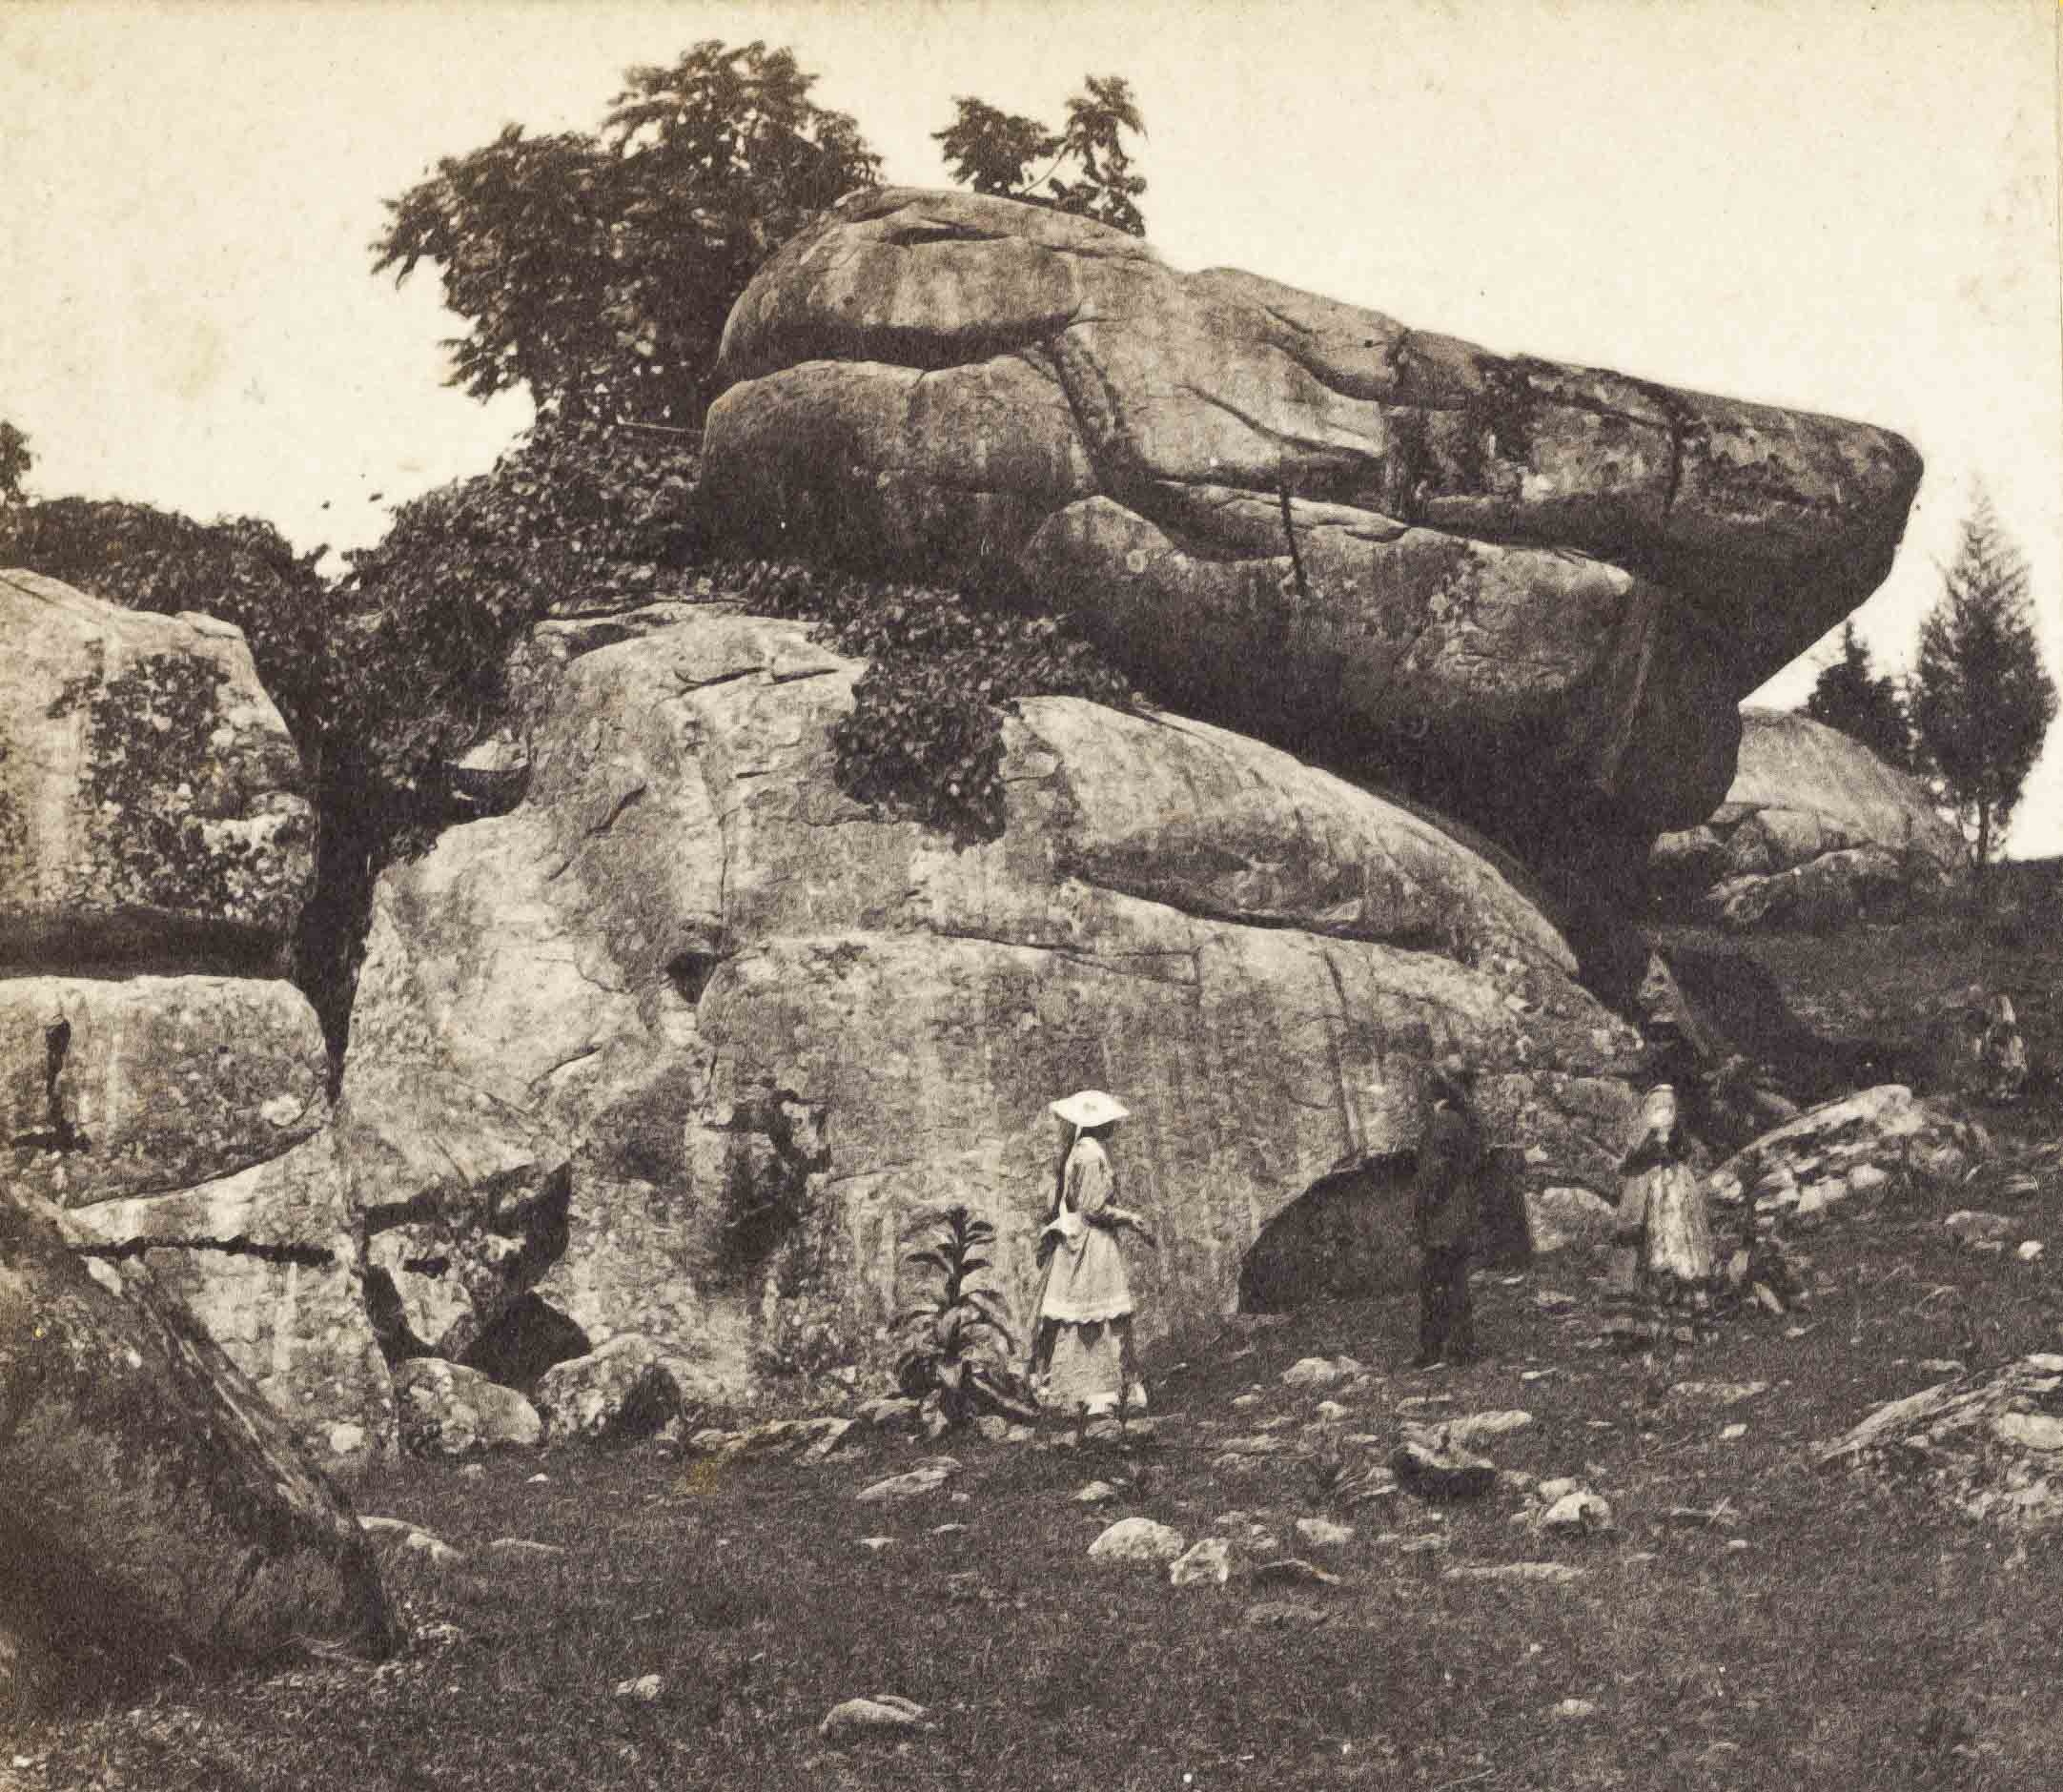 Devil's Den at Gettysburg National Military Park will close for up